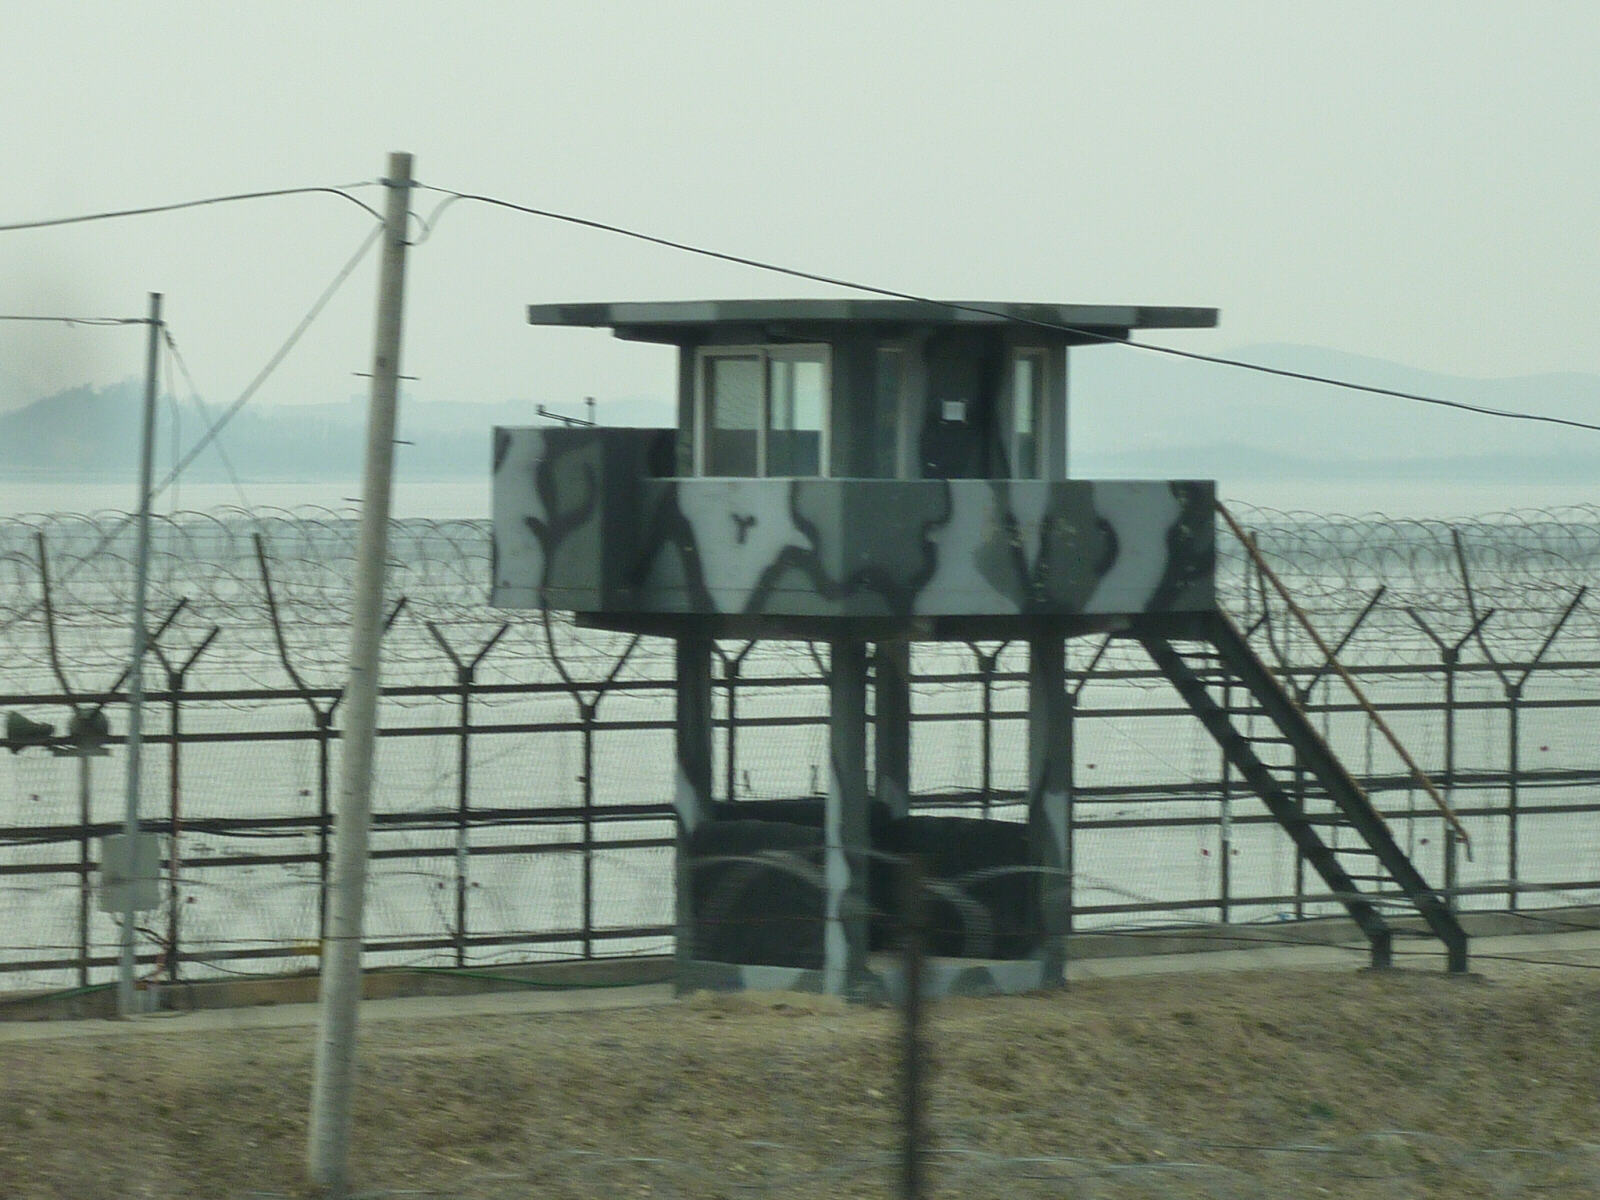 Border watchtower between South and North Korea